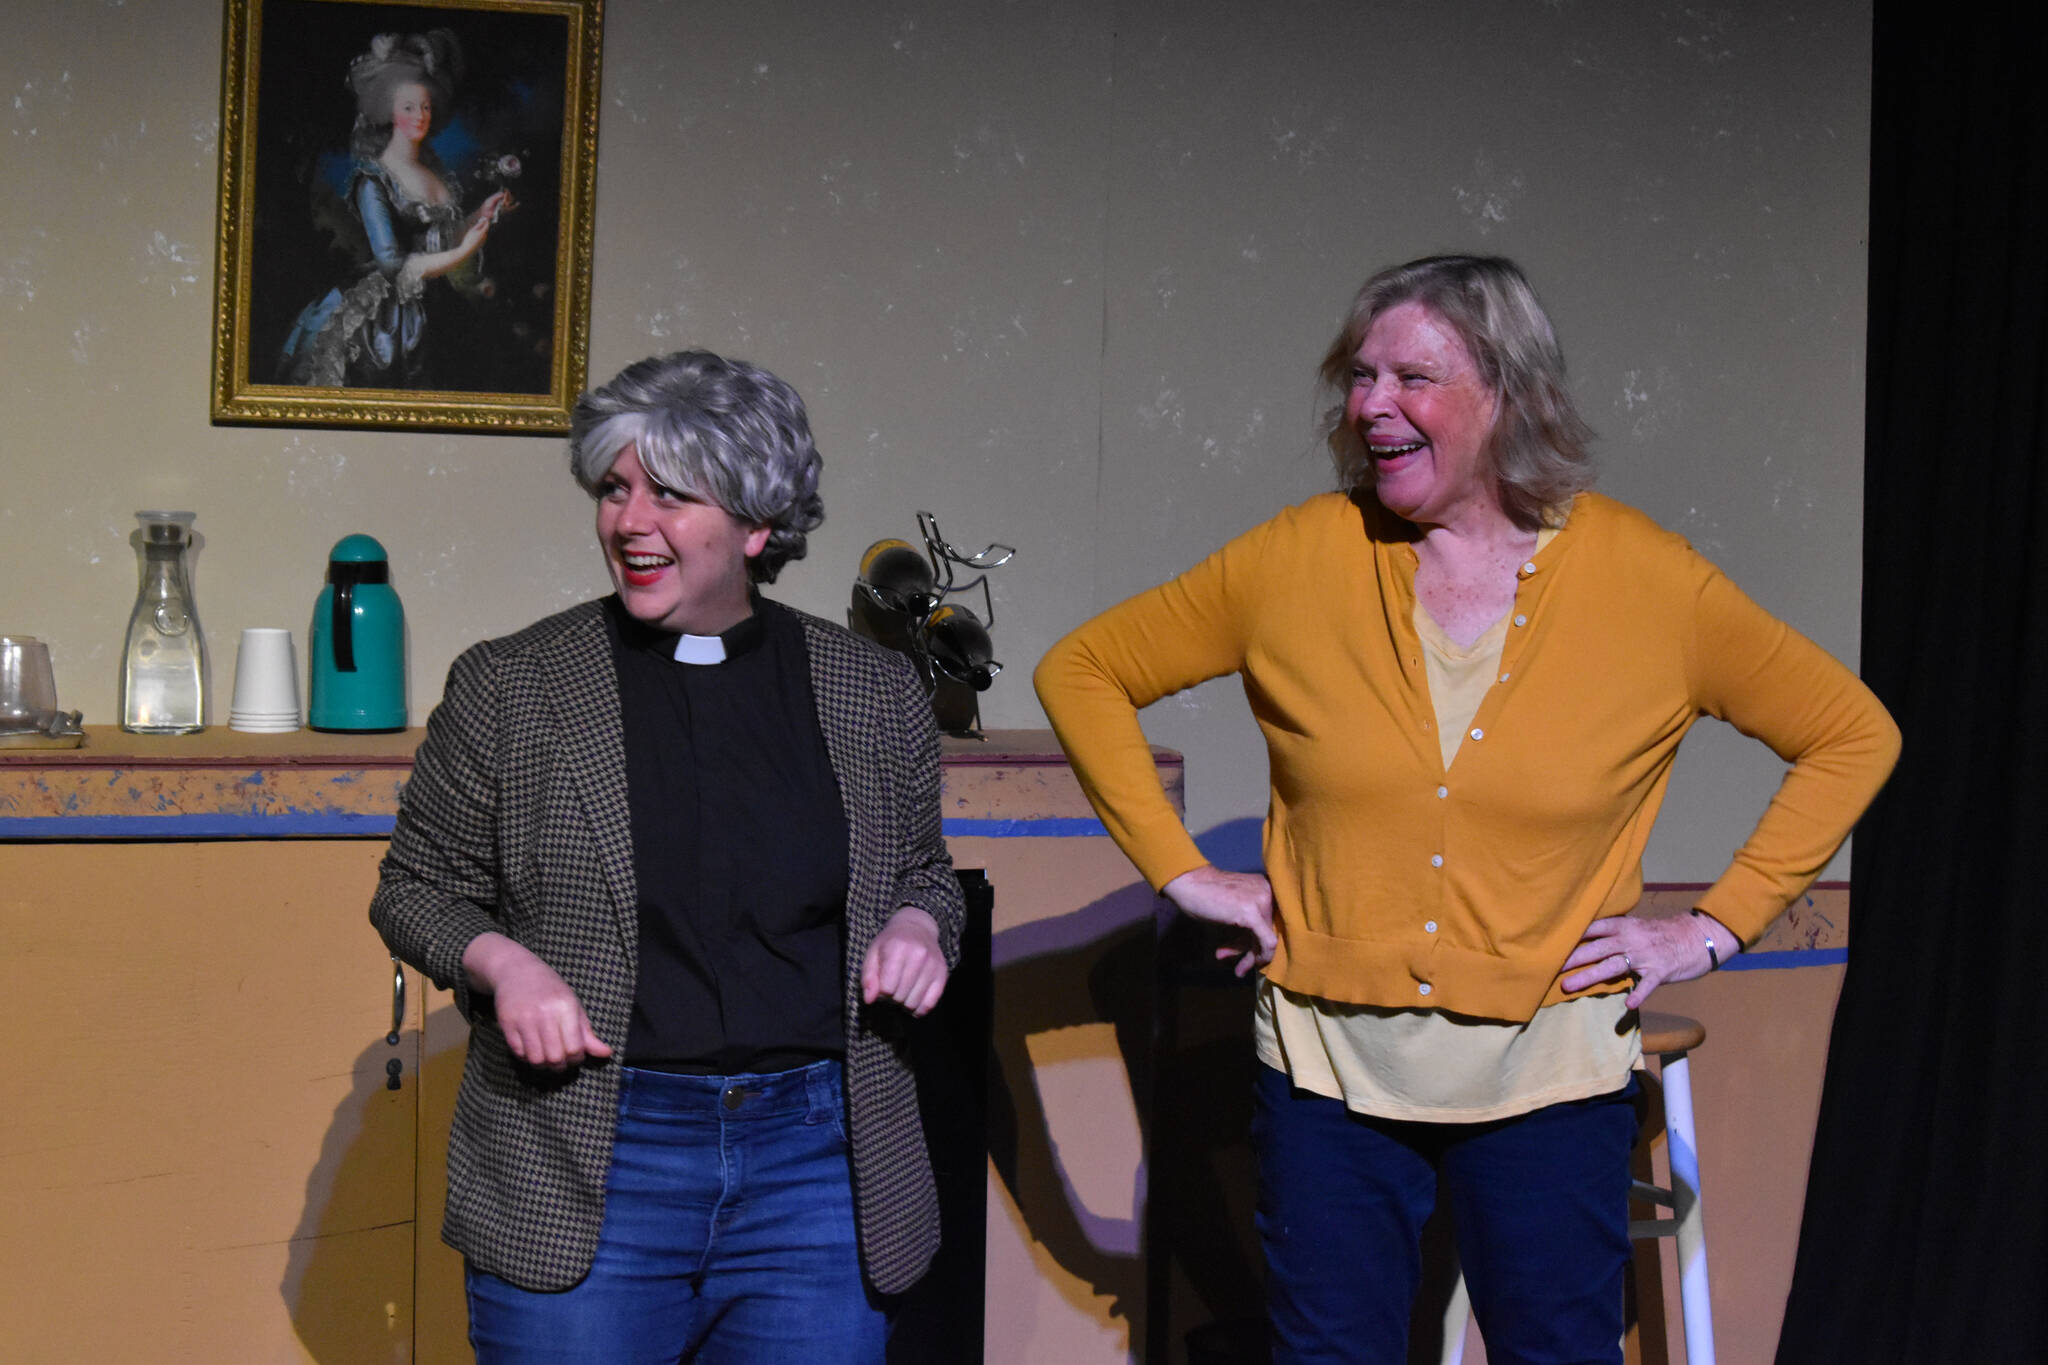 Lacey Jane Brewster and Terri Zopf-Schoessler act during a rehearsal of “Menopause Made Me Do It” on Tuesday, Sept. 13, 2022, in Soldotna, Alaska. (Jake Dye/Peninsula Clarion)